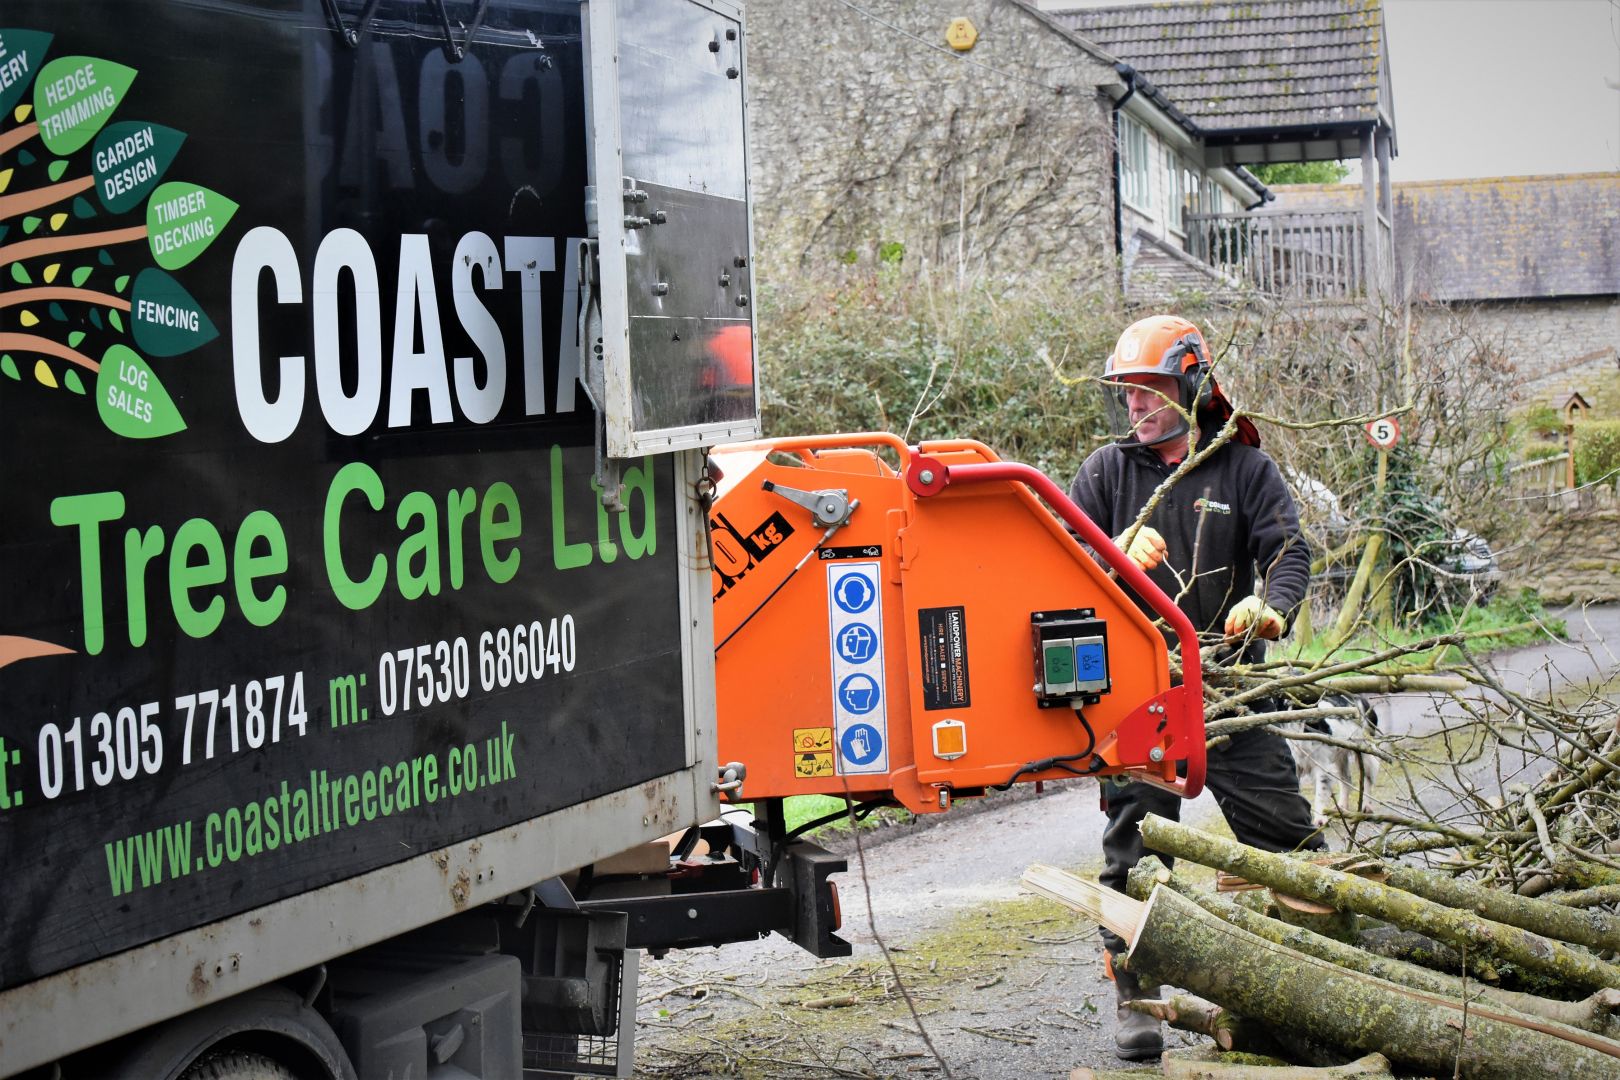 waste management, Weymouth tree surgeon, faq, faqs, FAQs, Weymouth tree surgery, Weymouth tree surgeons, tree surgeons Weymouth, storm damage, clearing storm damage, arborist, climbing arborist, emergency tree work, tree safety work, wood chipper, recycling, waste recycling